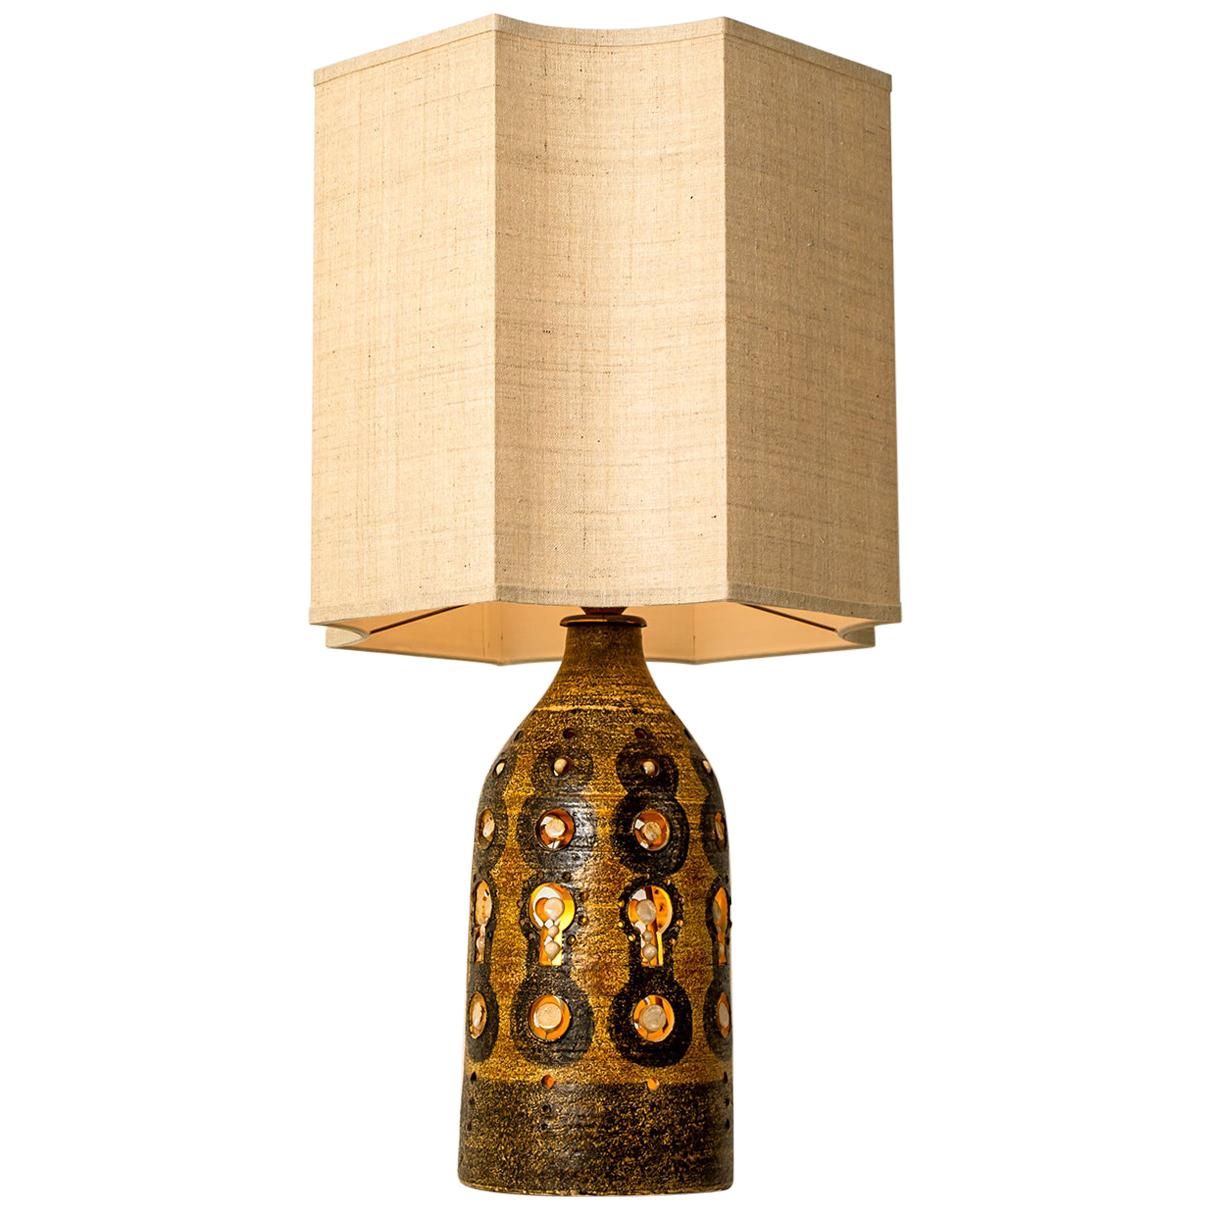 Georges Pelletier table lamps, circa 1970, France. Glazed ceramic with decorative designs
With wonderful off white and taupe (silk) shade from Rene Houben. 

In very good original condition. Cleaned well wired and ready to use. Each light